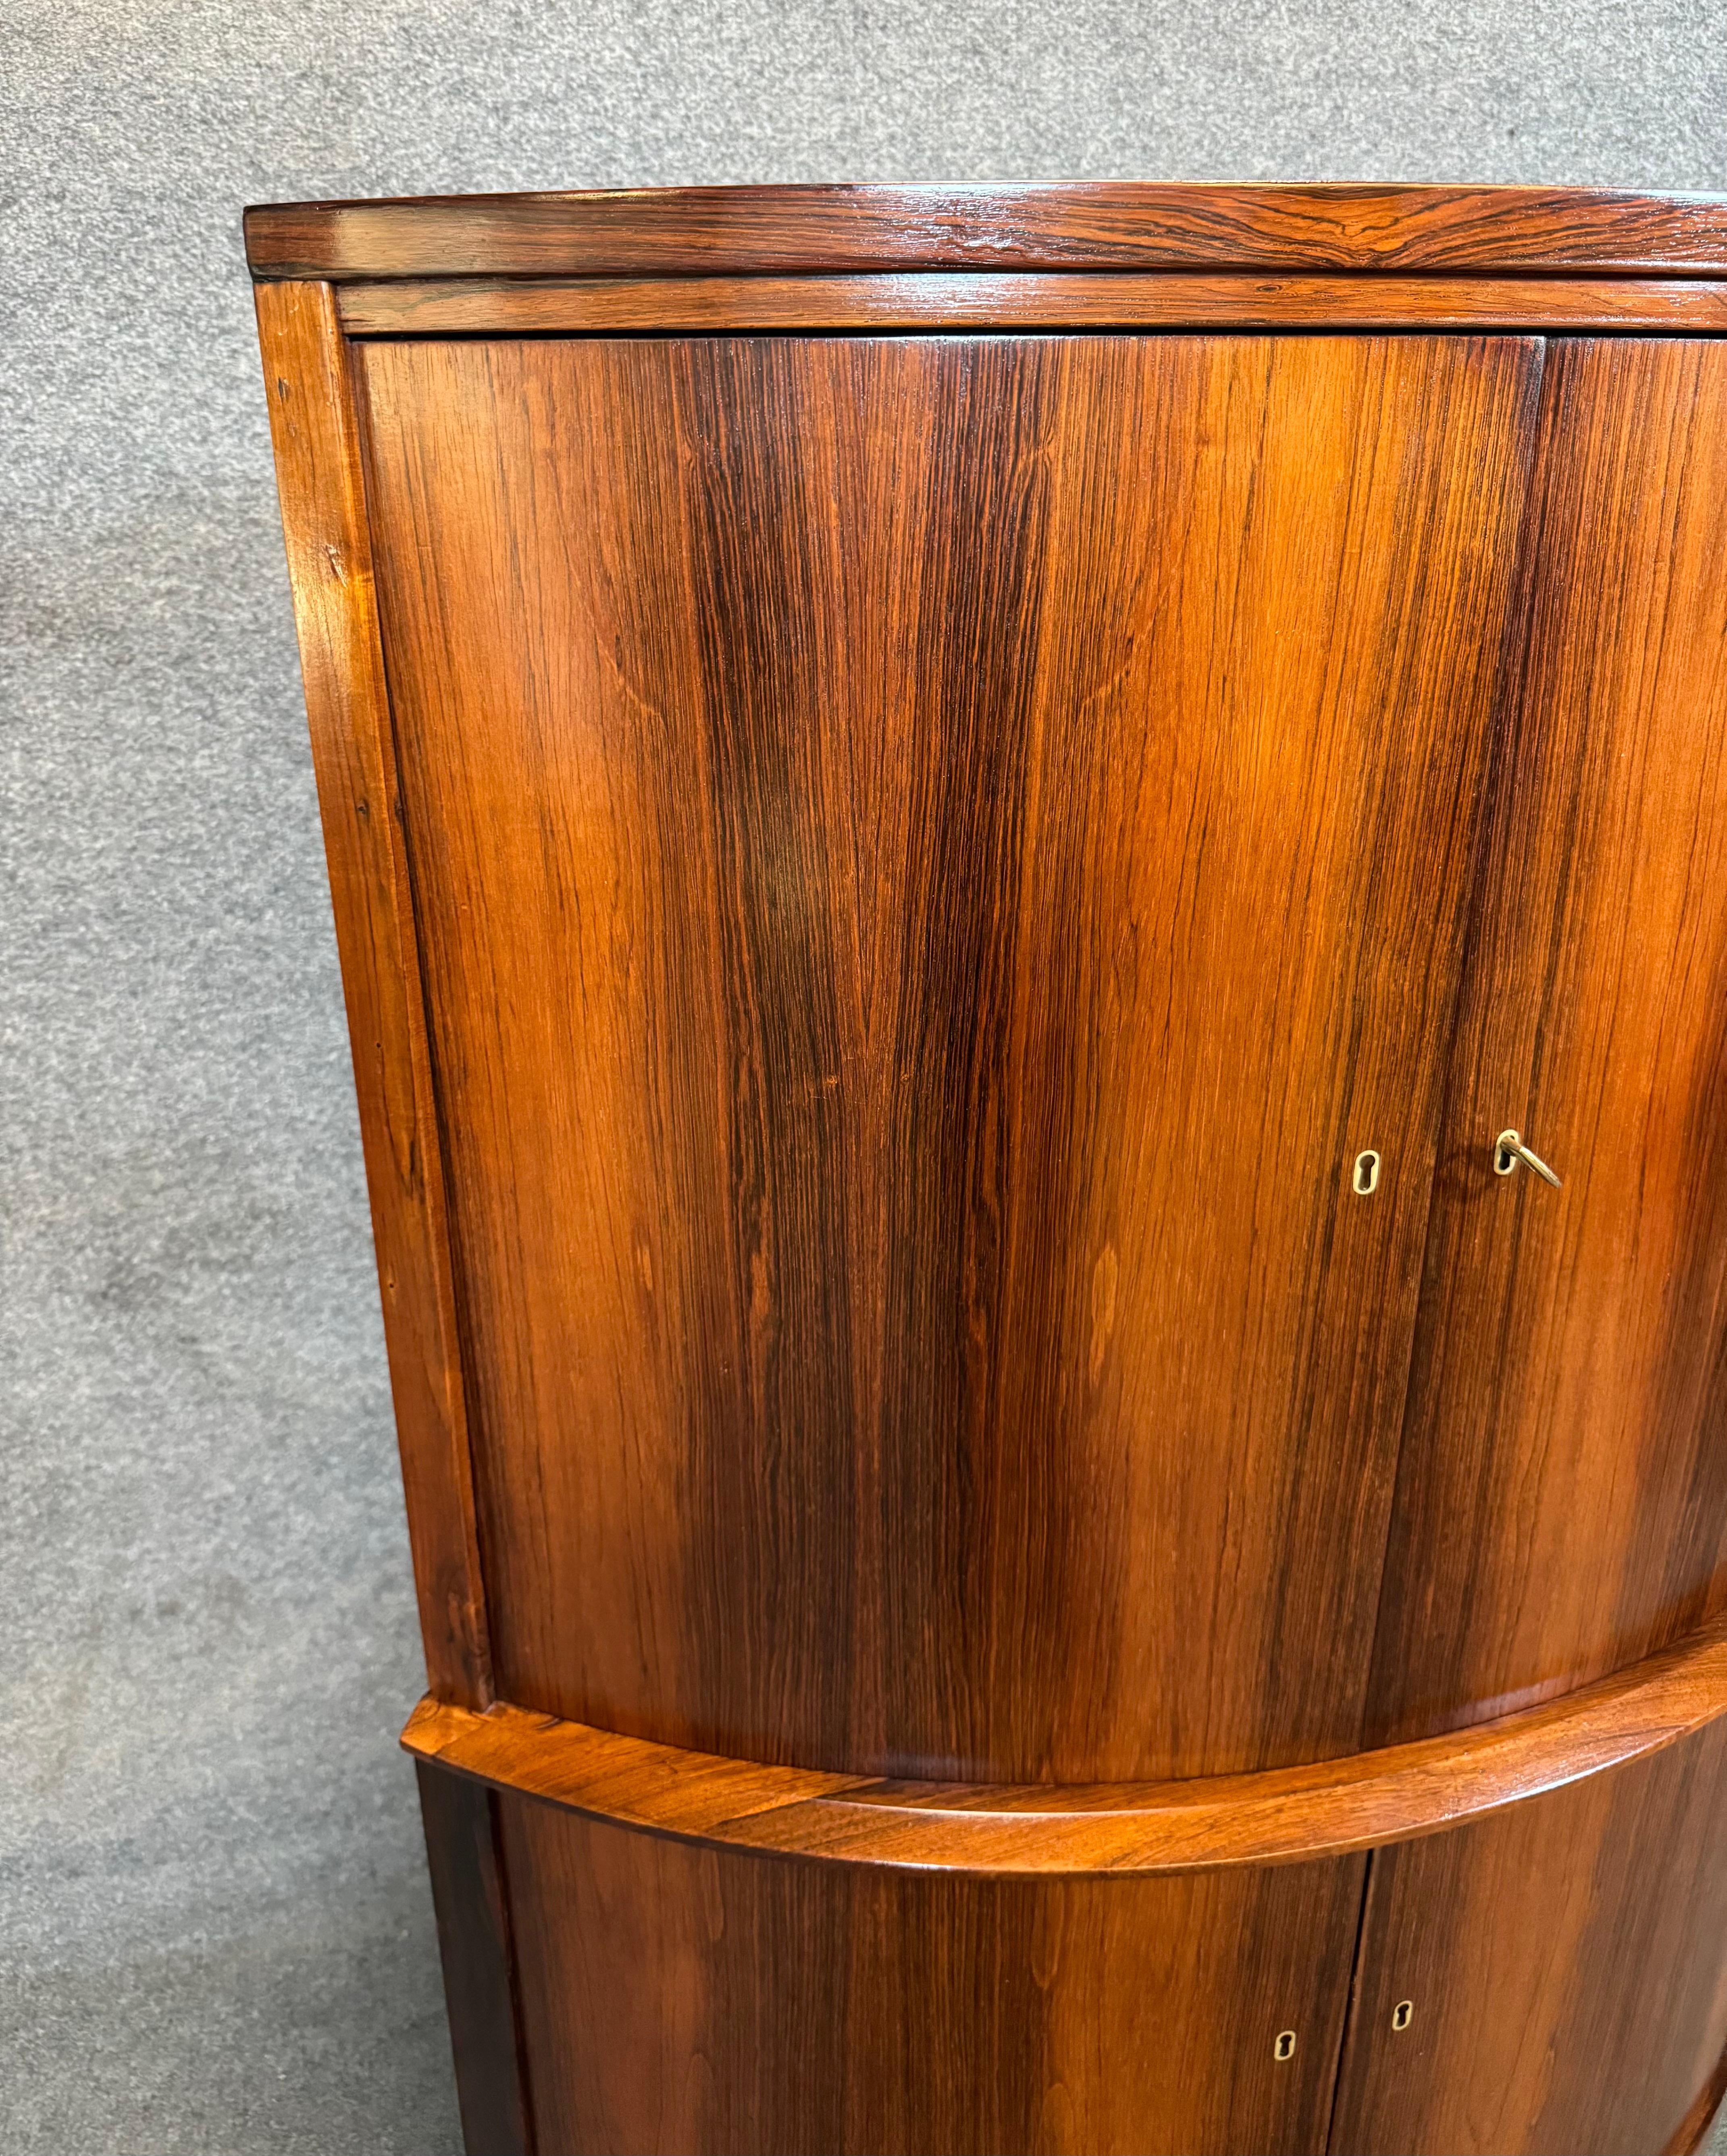 Here is a beautiful scandinavian modern corner cabinet in rosewood attributed to designer Agner Christoffersen and manufactured in Denmark in the 1960's.
This lovely piece, recently imported from Europe to California before its refinishing, features